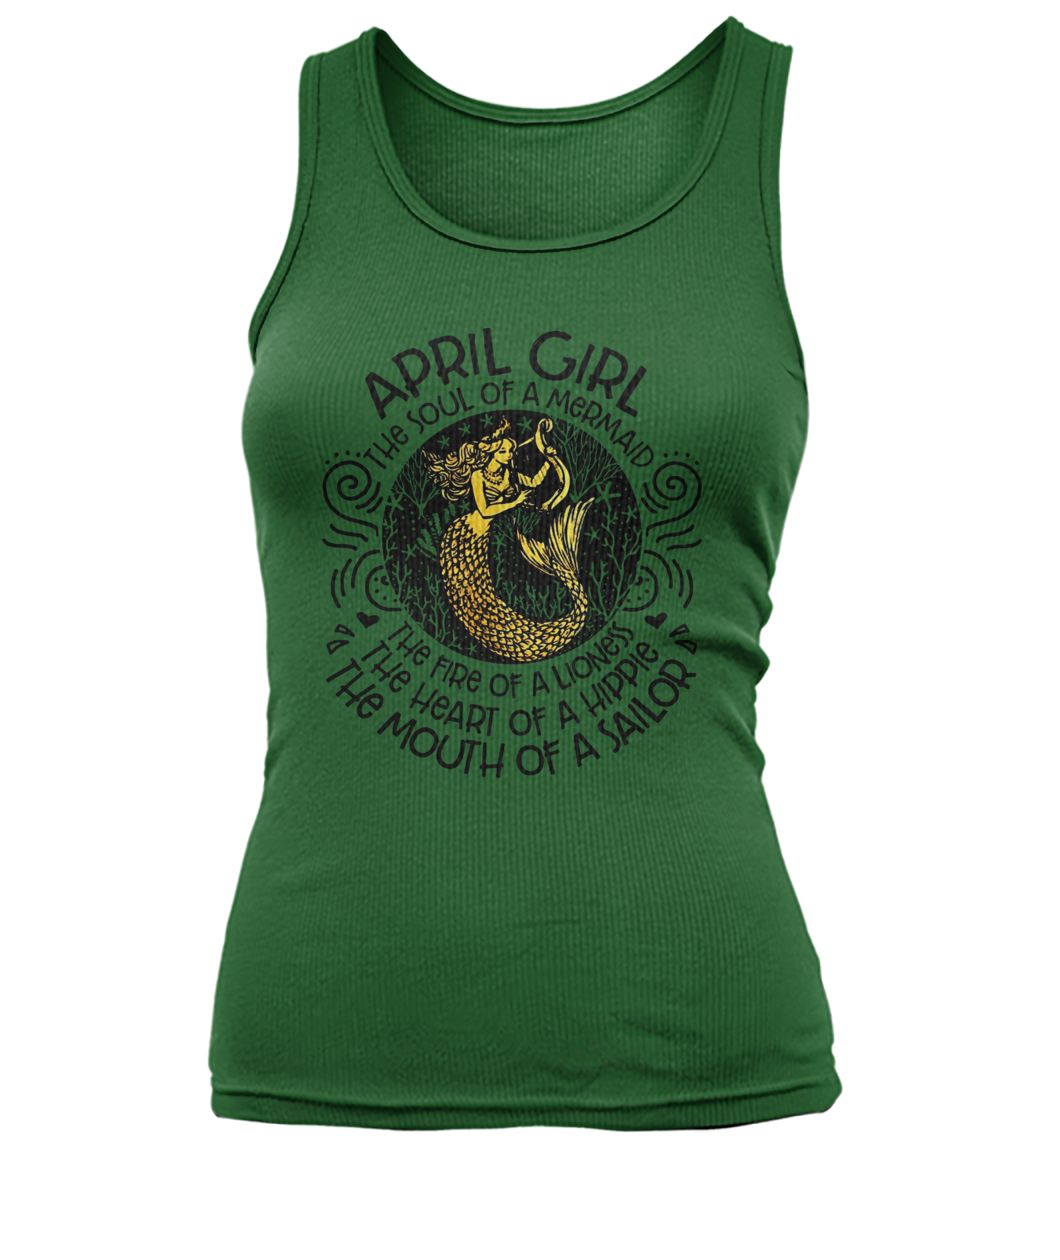 April girl the soul of a mermaid the fire of a lioness women's tank top